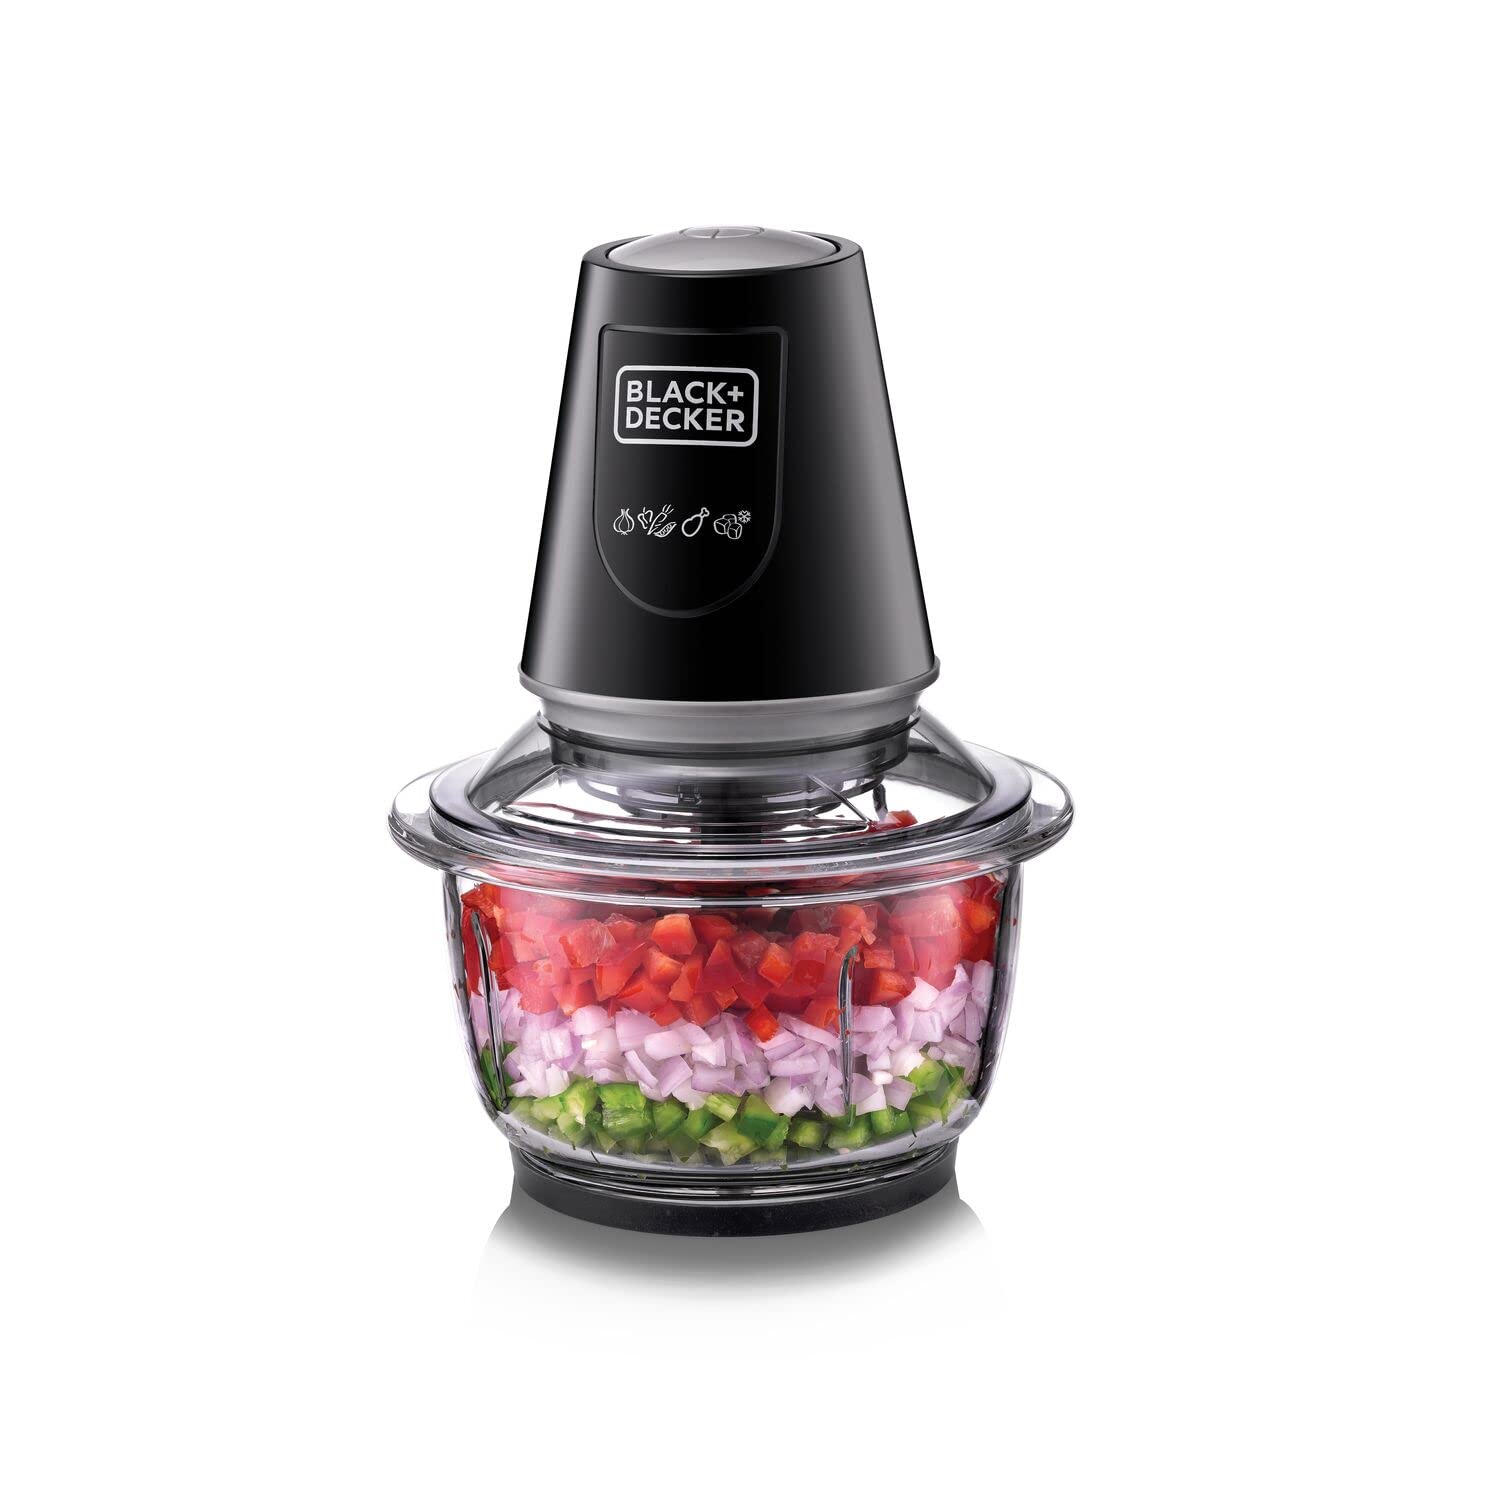 BLACK+DECKER 400W 1.2L Vertical Glass Chopper/Mincer XXL Glass Bowl Capacity With Removable Four Blade System Helps, Chop/Crush Ice/Mince/Grind/Puree Variety Of Ingredients GC400-B5